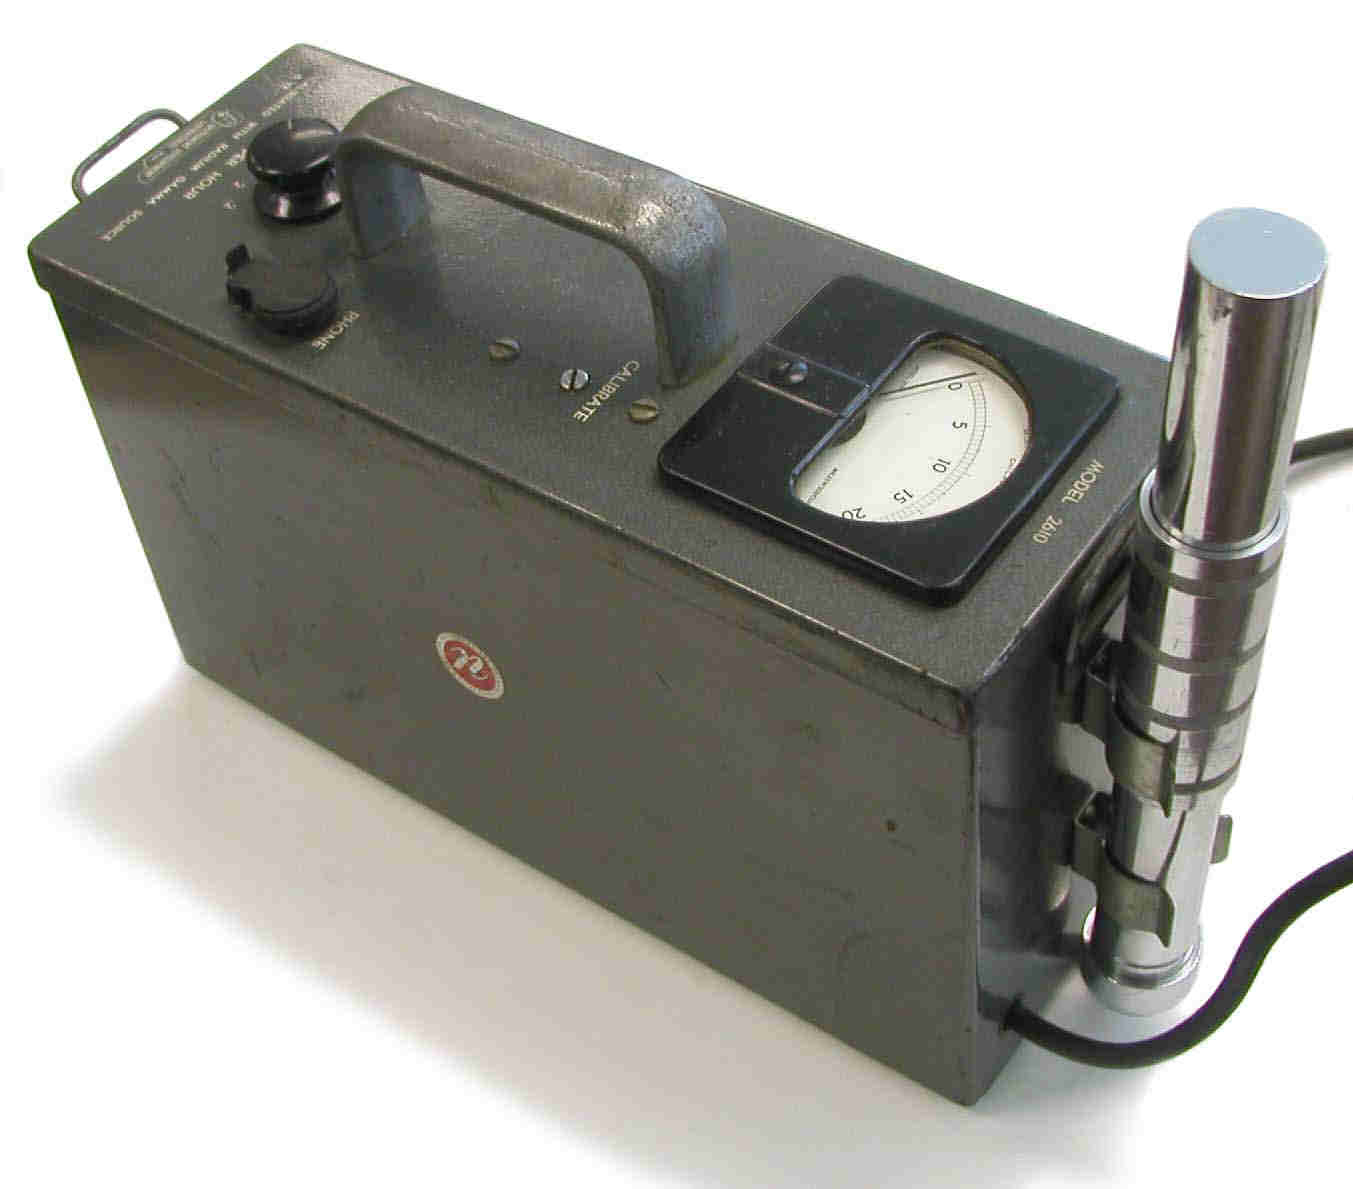 Nuclear Instrument and Chemical Corp Model 2610 (late 1940s) and Model 2610A (1950–1954) GMs